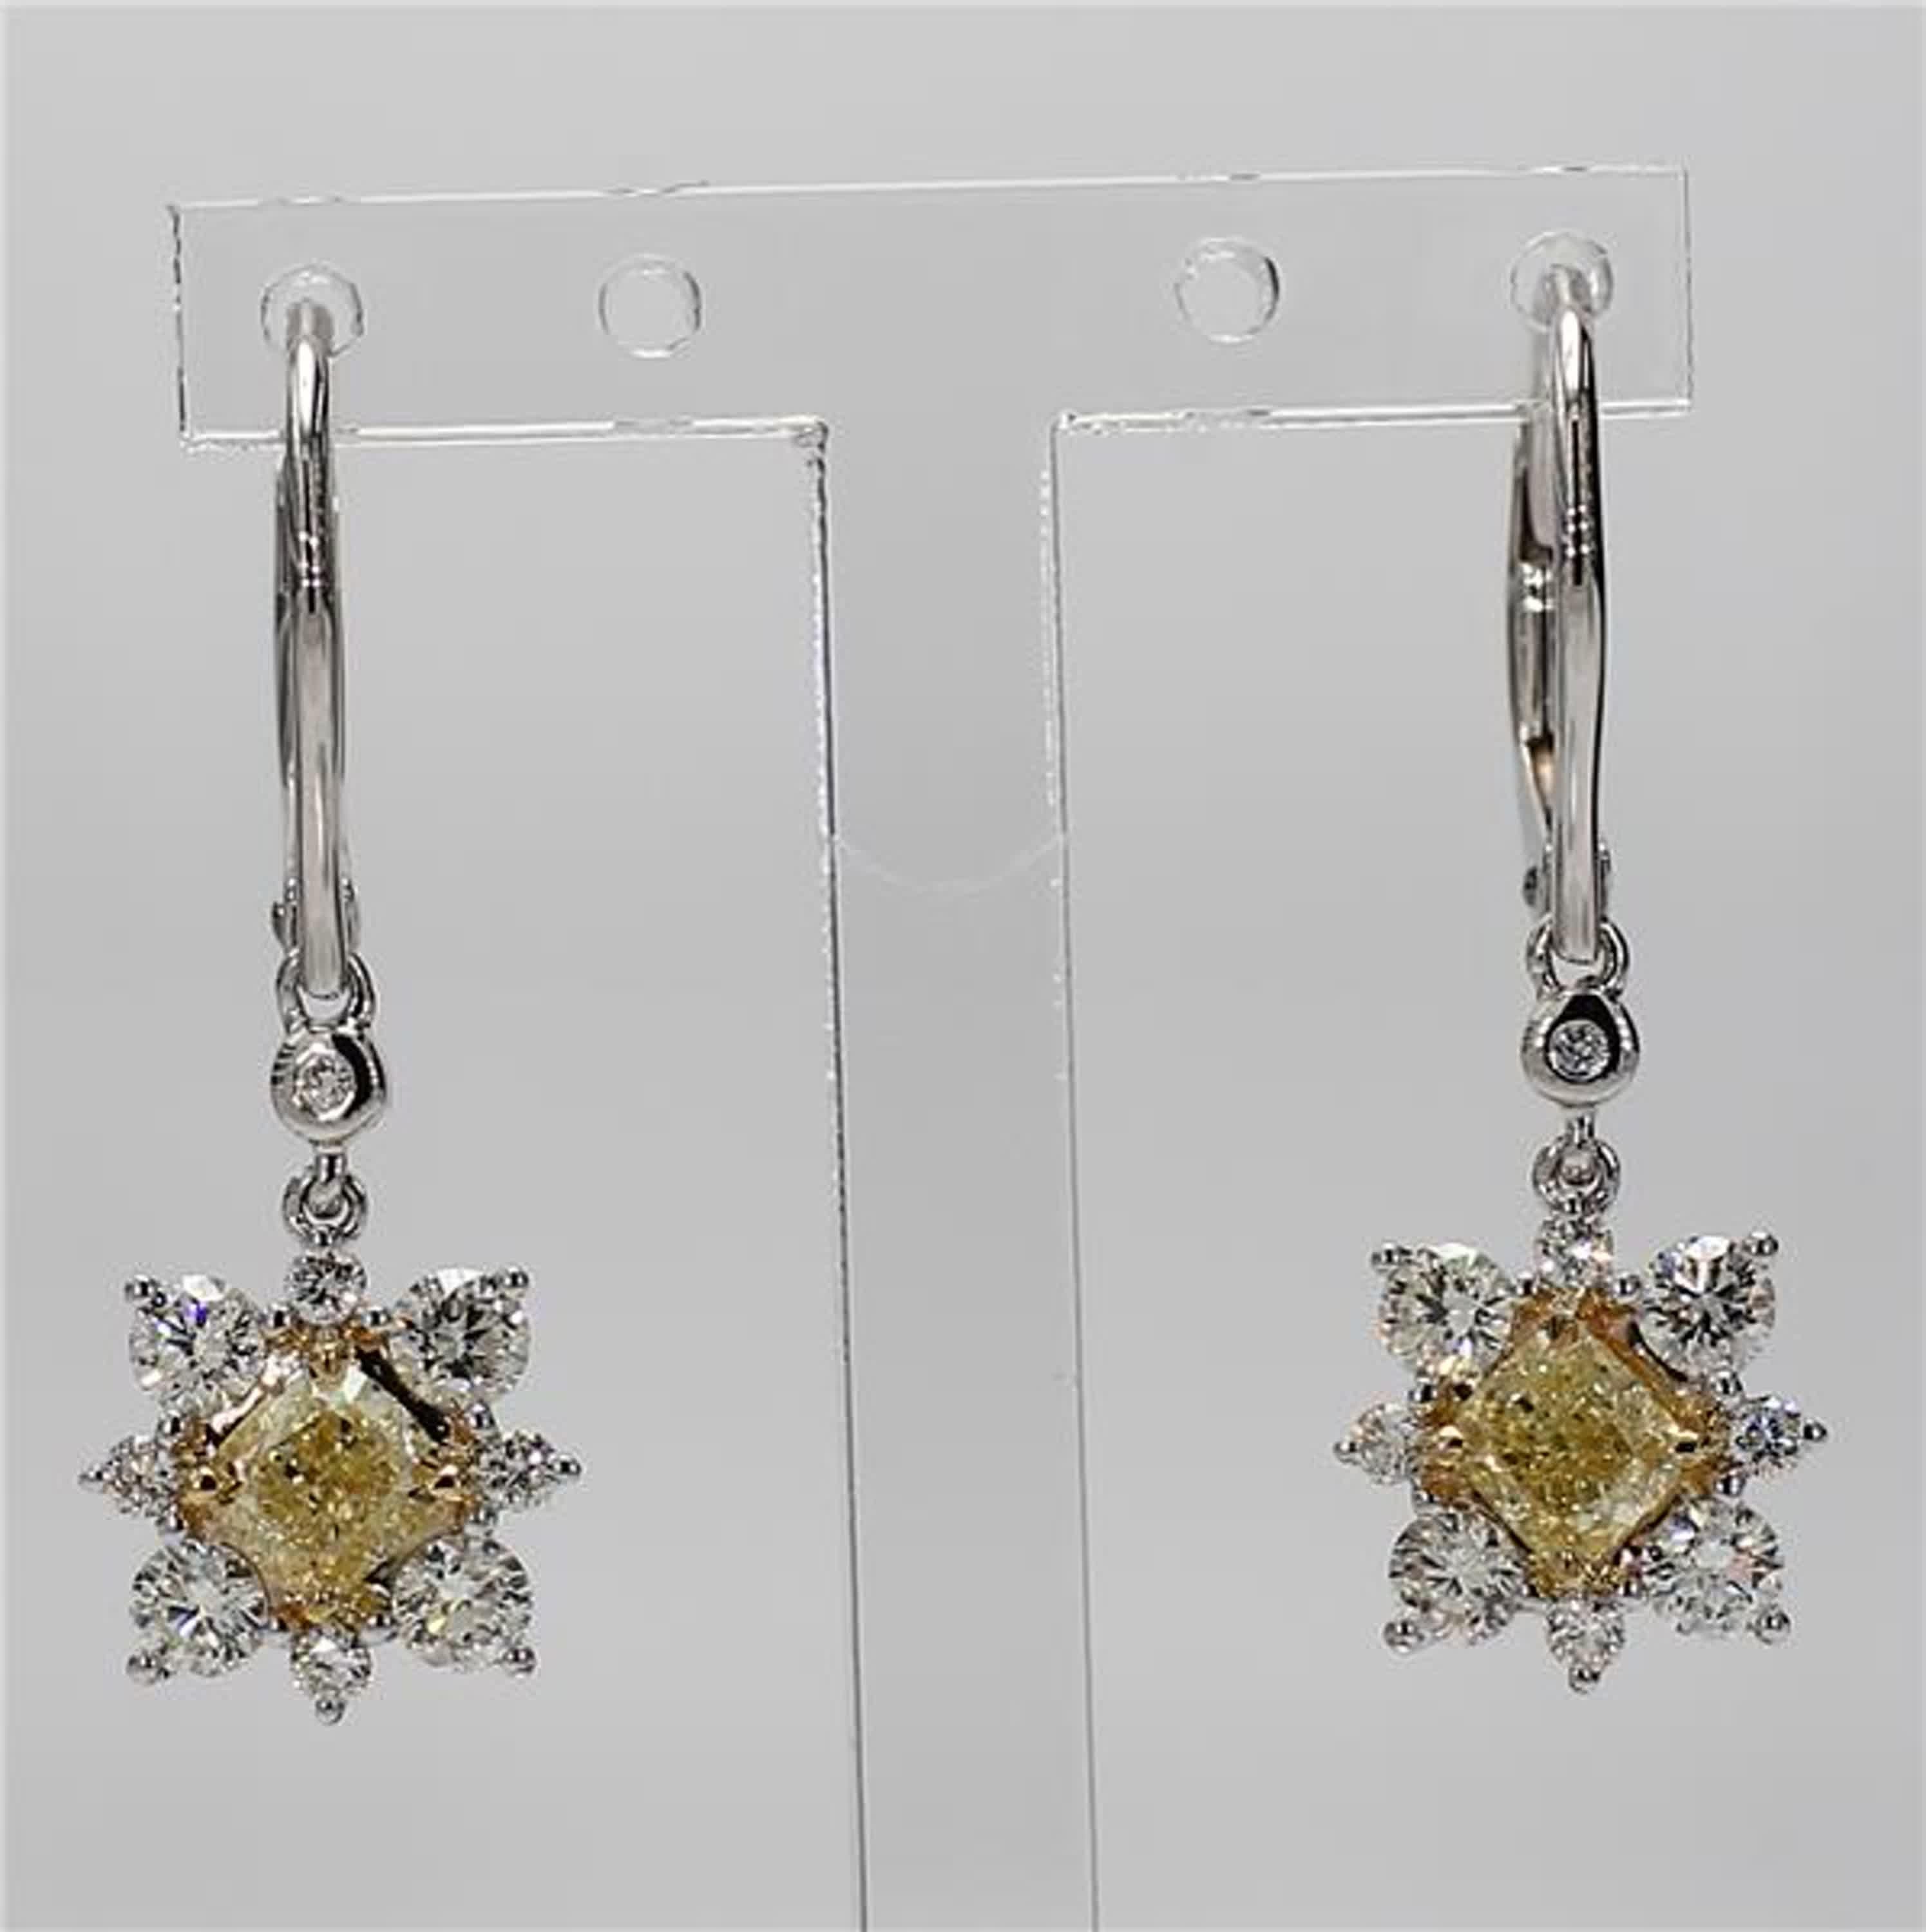 RareGemWorld's classic diamond earrings. Mounted in a beautiful 18K Yellow and White Gold setting with natural cushion cut yellow diamonds. The yellow diamonds are surrounded by small round natural white diamond melee. These earrings are guaranteed